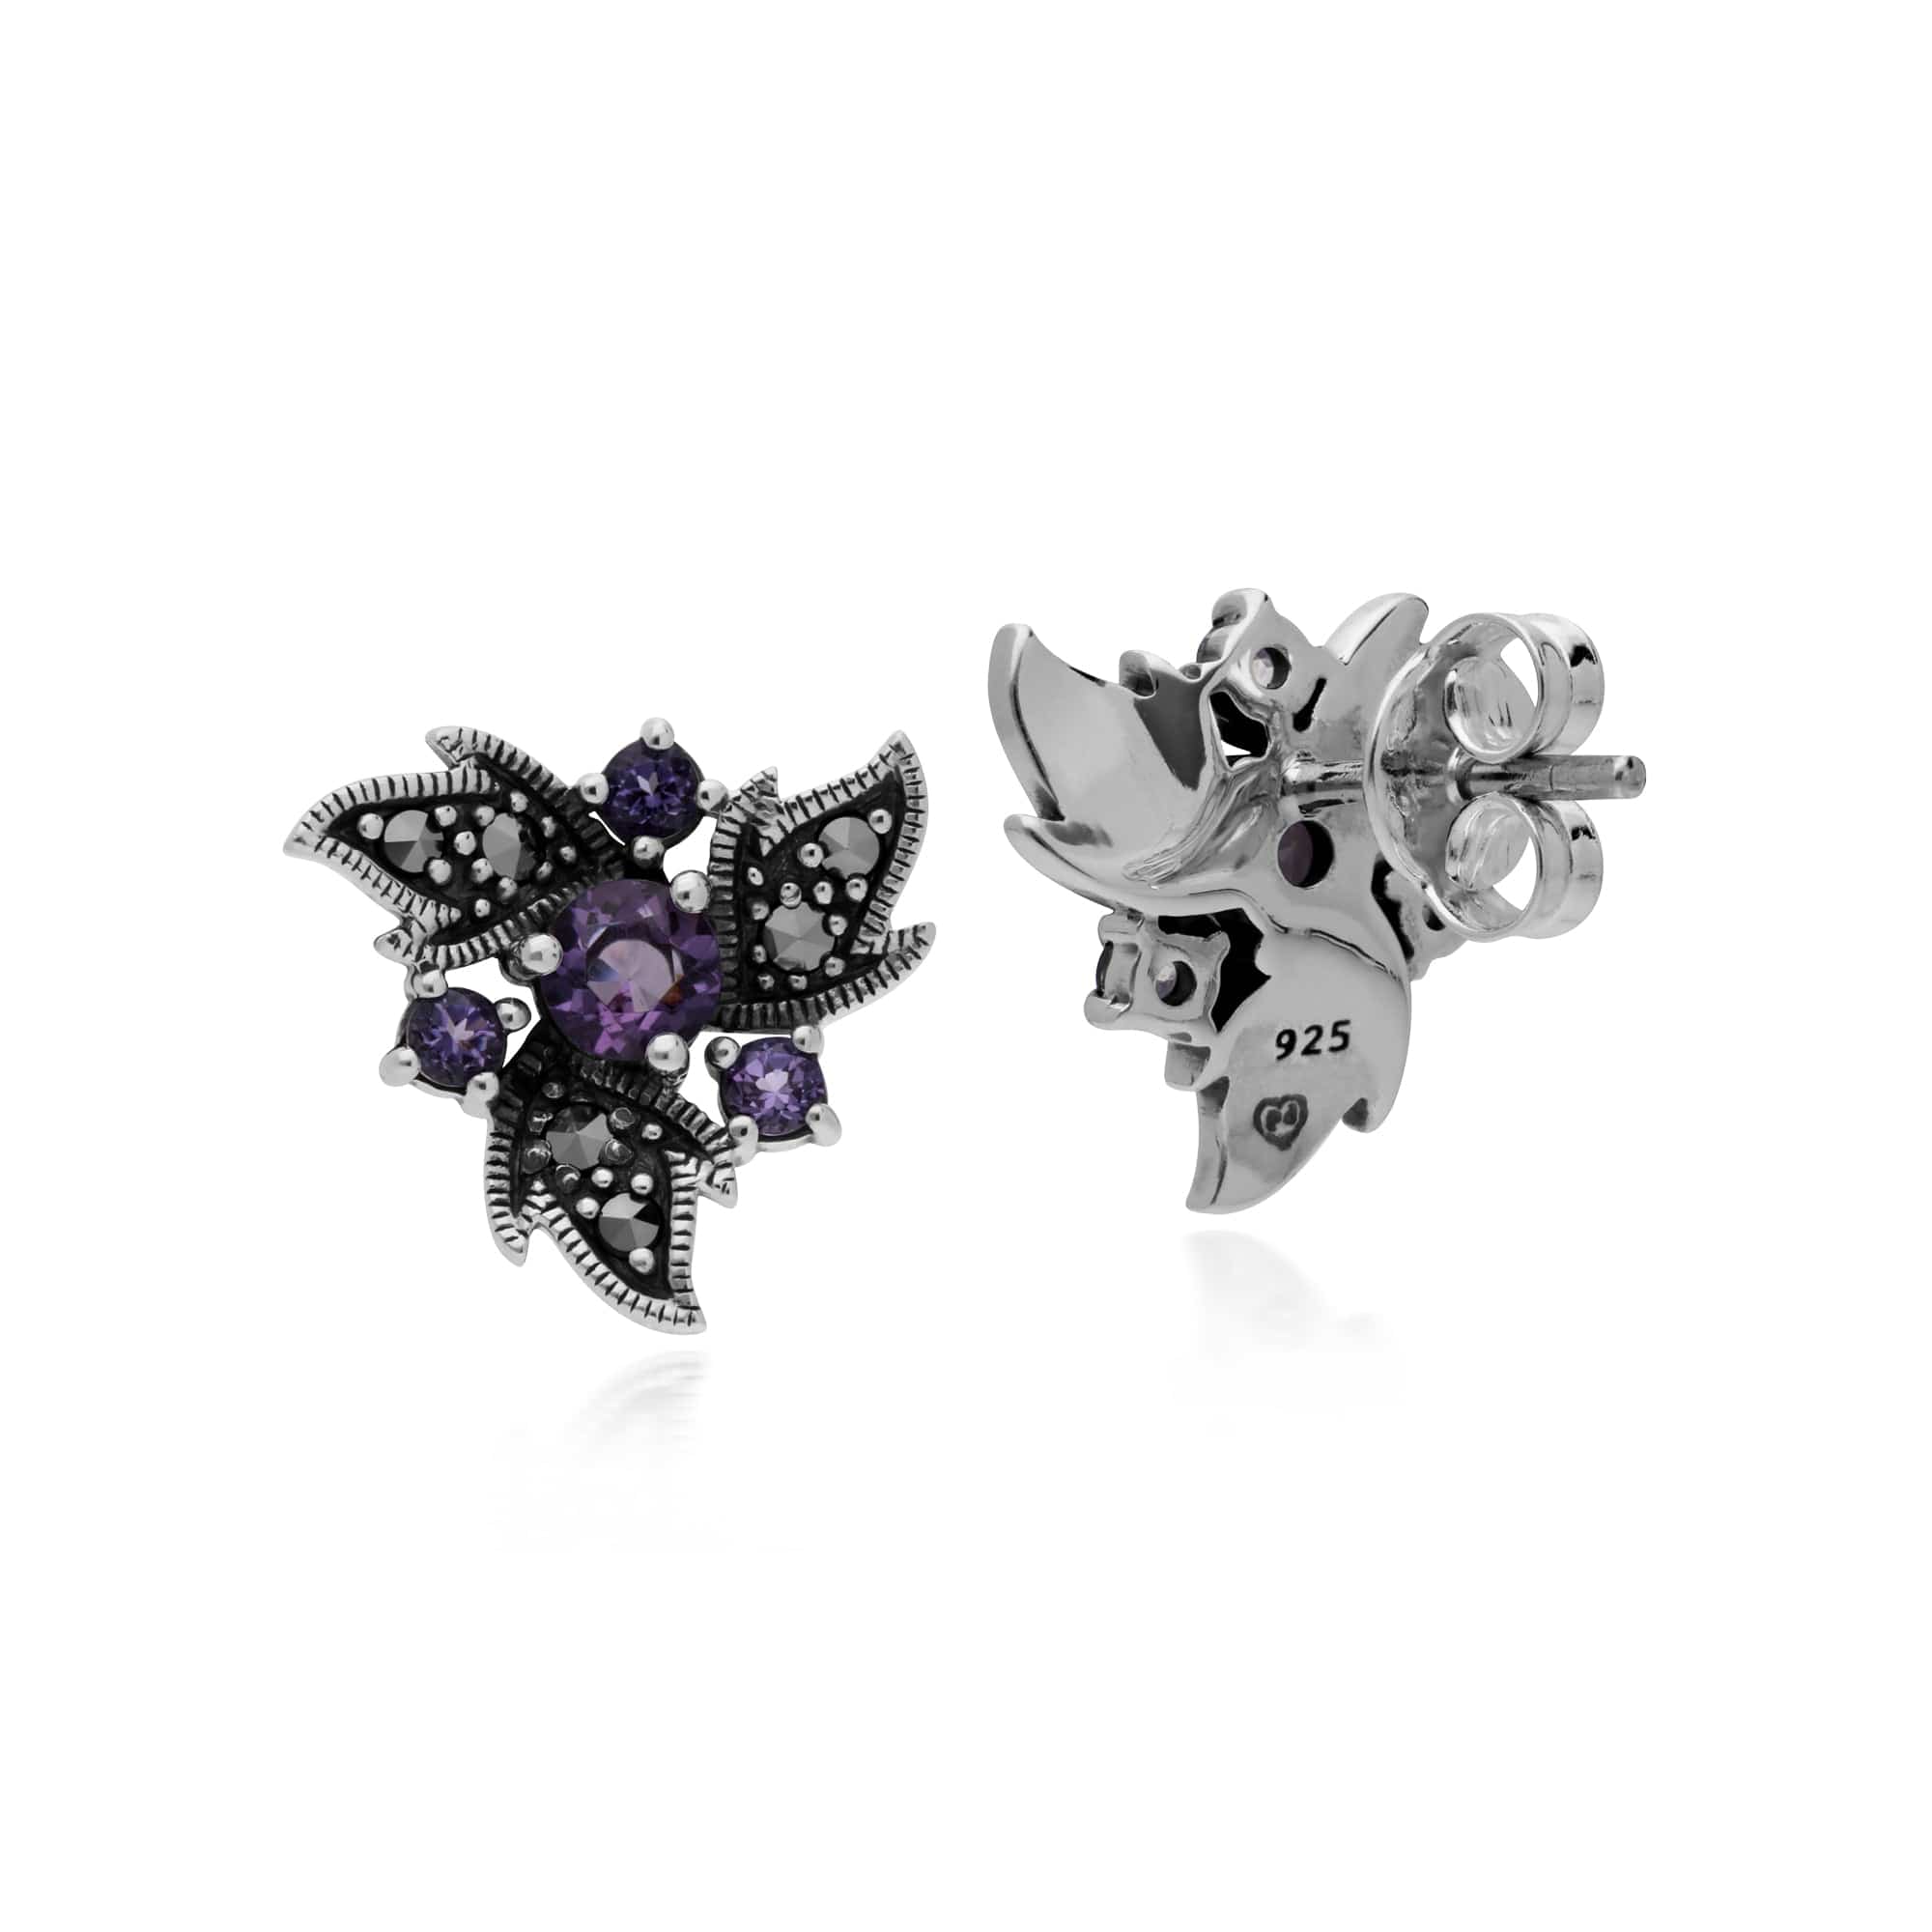 214E860402925 Art Nouveau Style Round Amethyst & Marcasite Floral Stud Earrings in 925 Sterling Silver 2